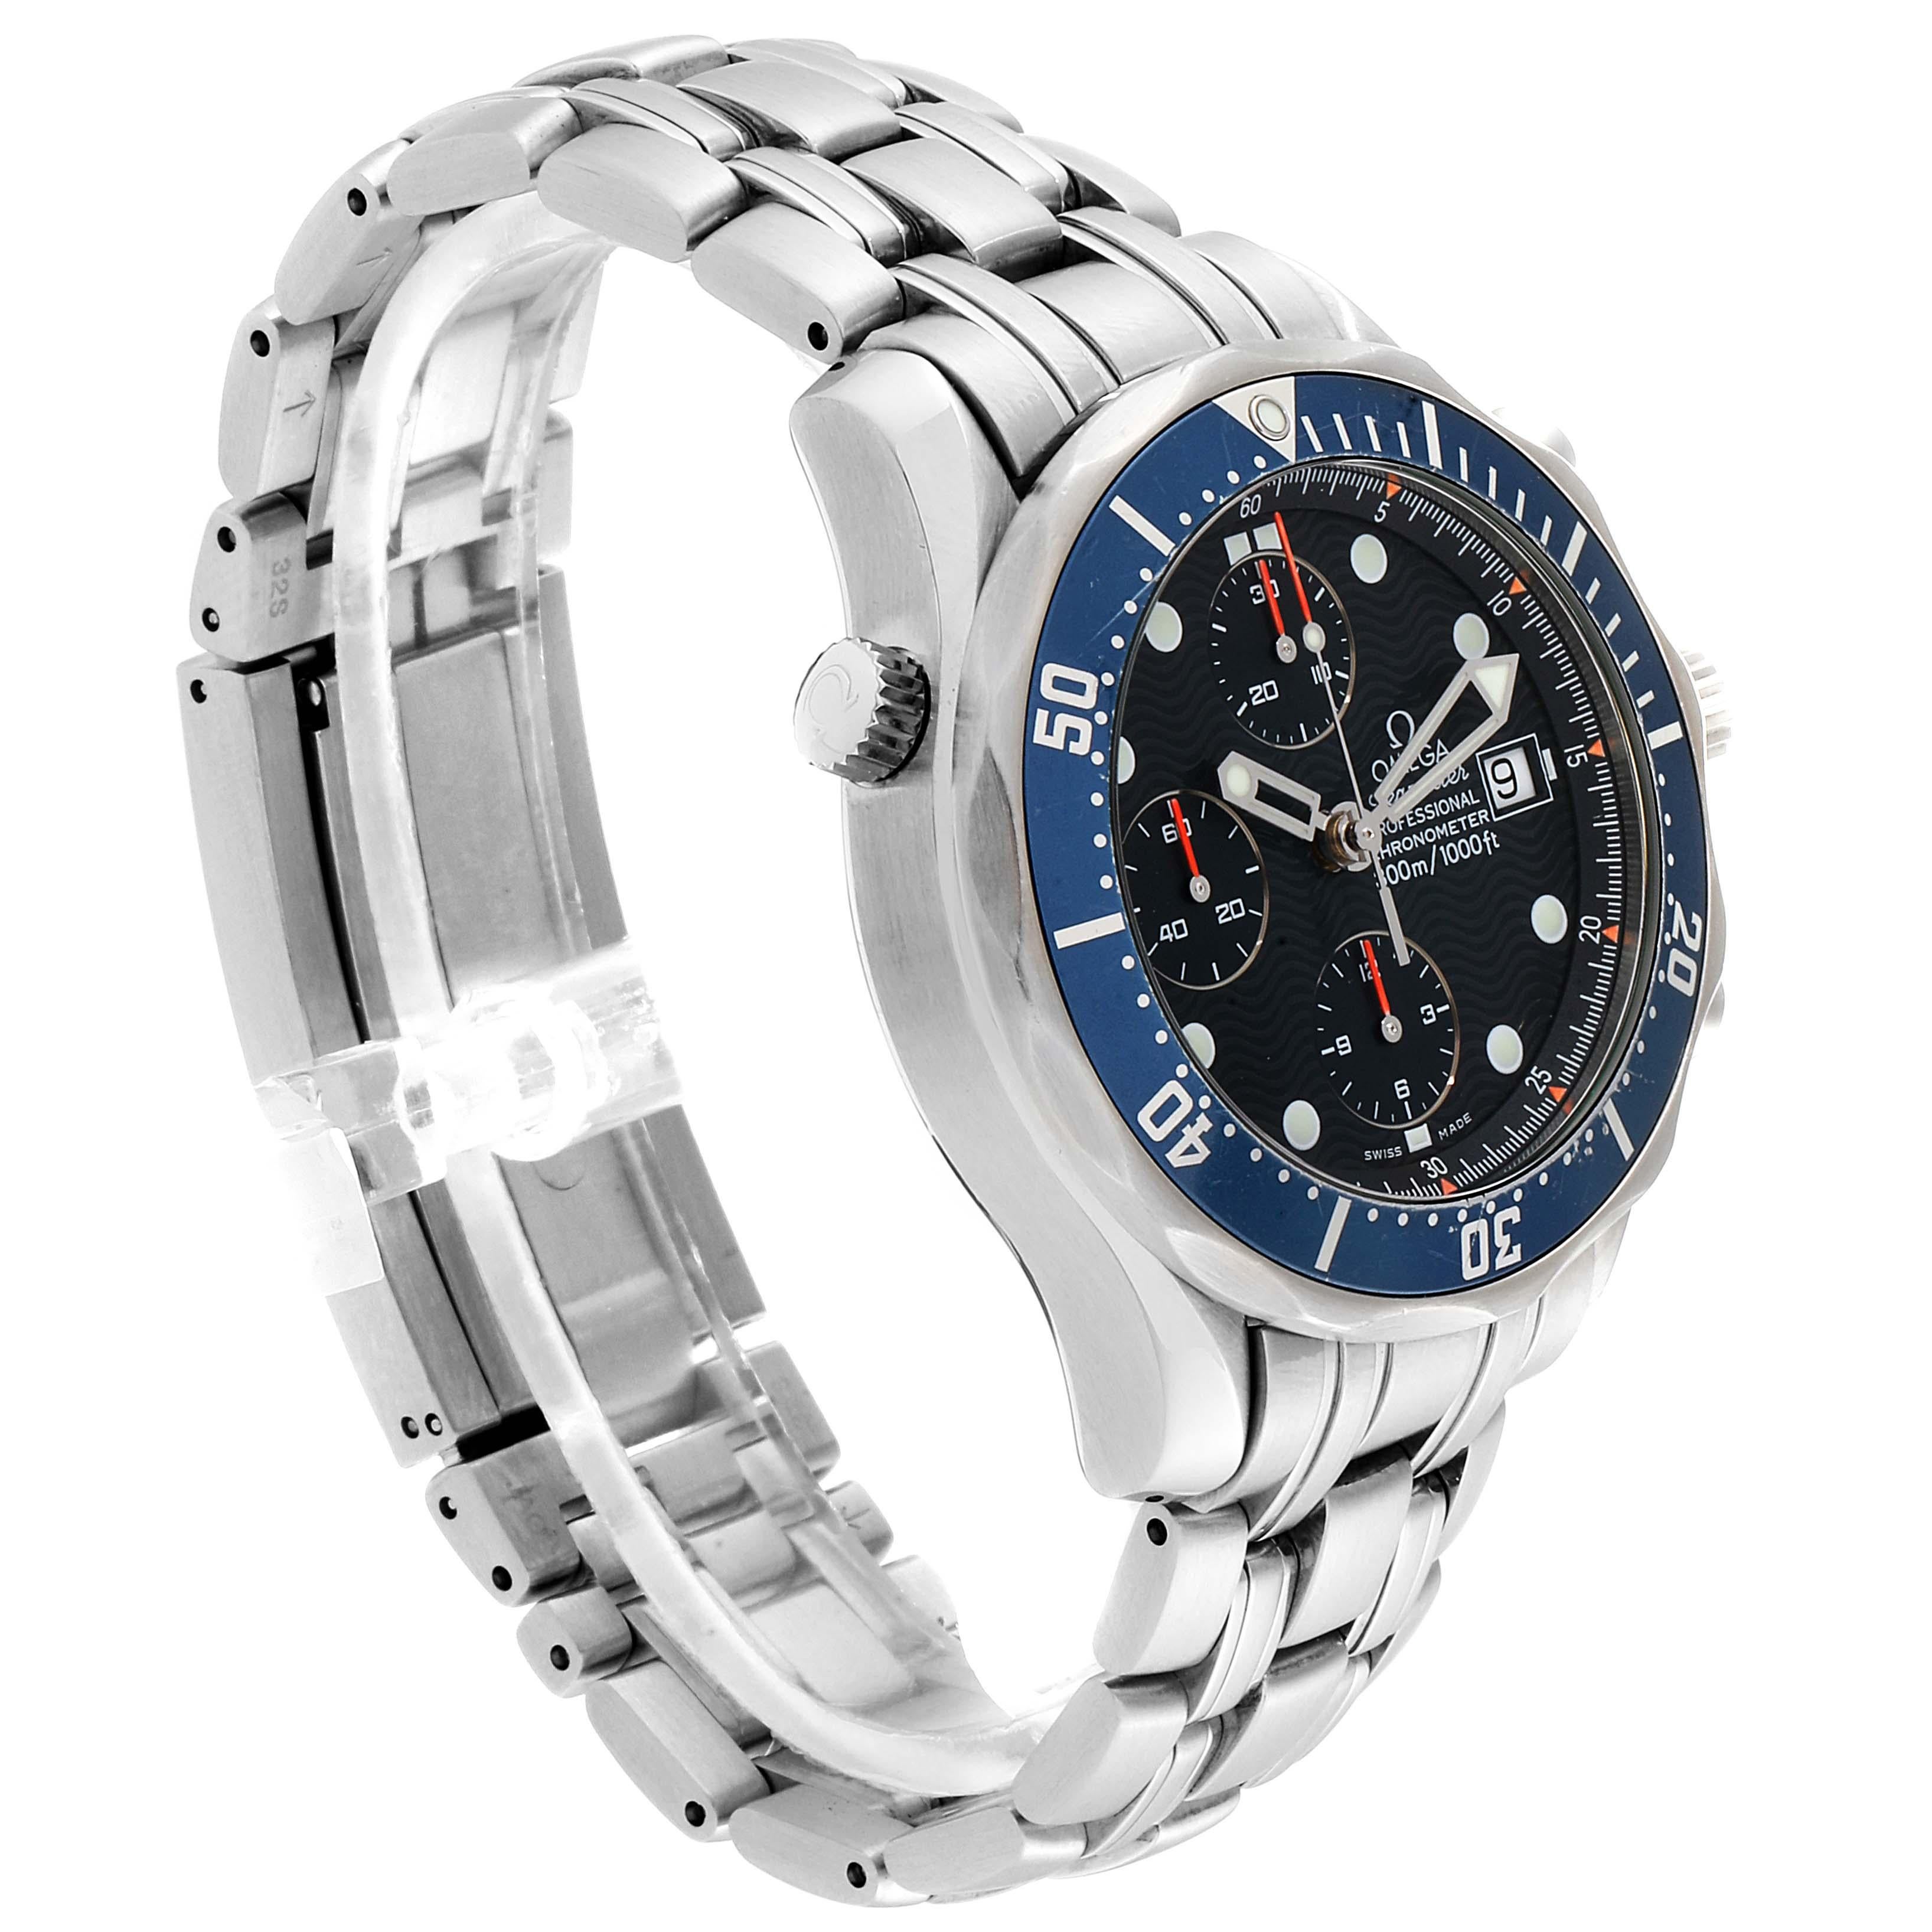 Omega Seamaster Bond Chrono Blue Wave Dial Men’s Watch 2599.80.00 In Excellent Condition For Sale In Atlanta, GA